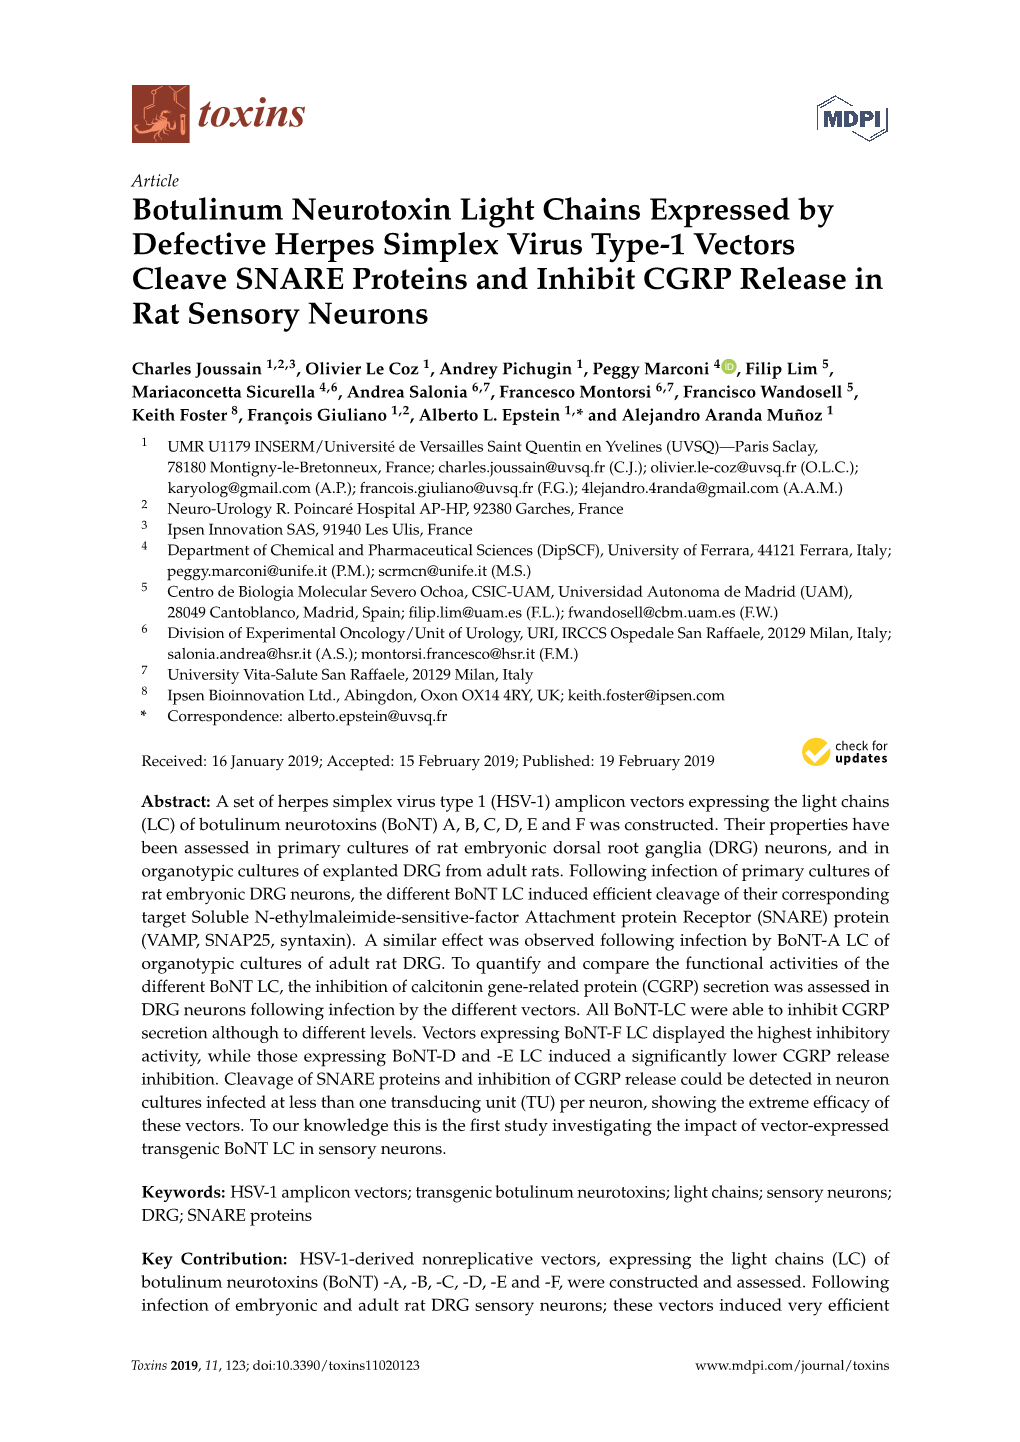 Botulinum Neurotoxin Light Chains Expressed by Defective Herpes Simplex Virus Type-1 Vectors Cleave SNARE Proteins and Inhibit CGRP Release in Rat Sensory Neurons